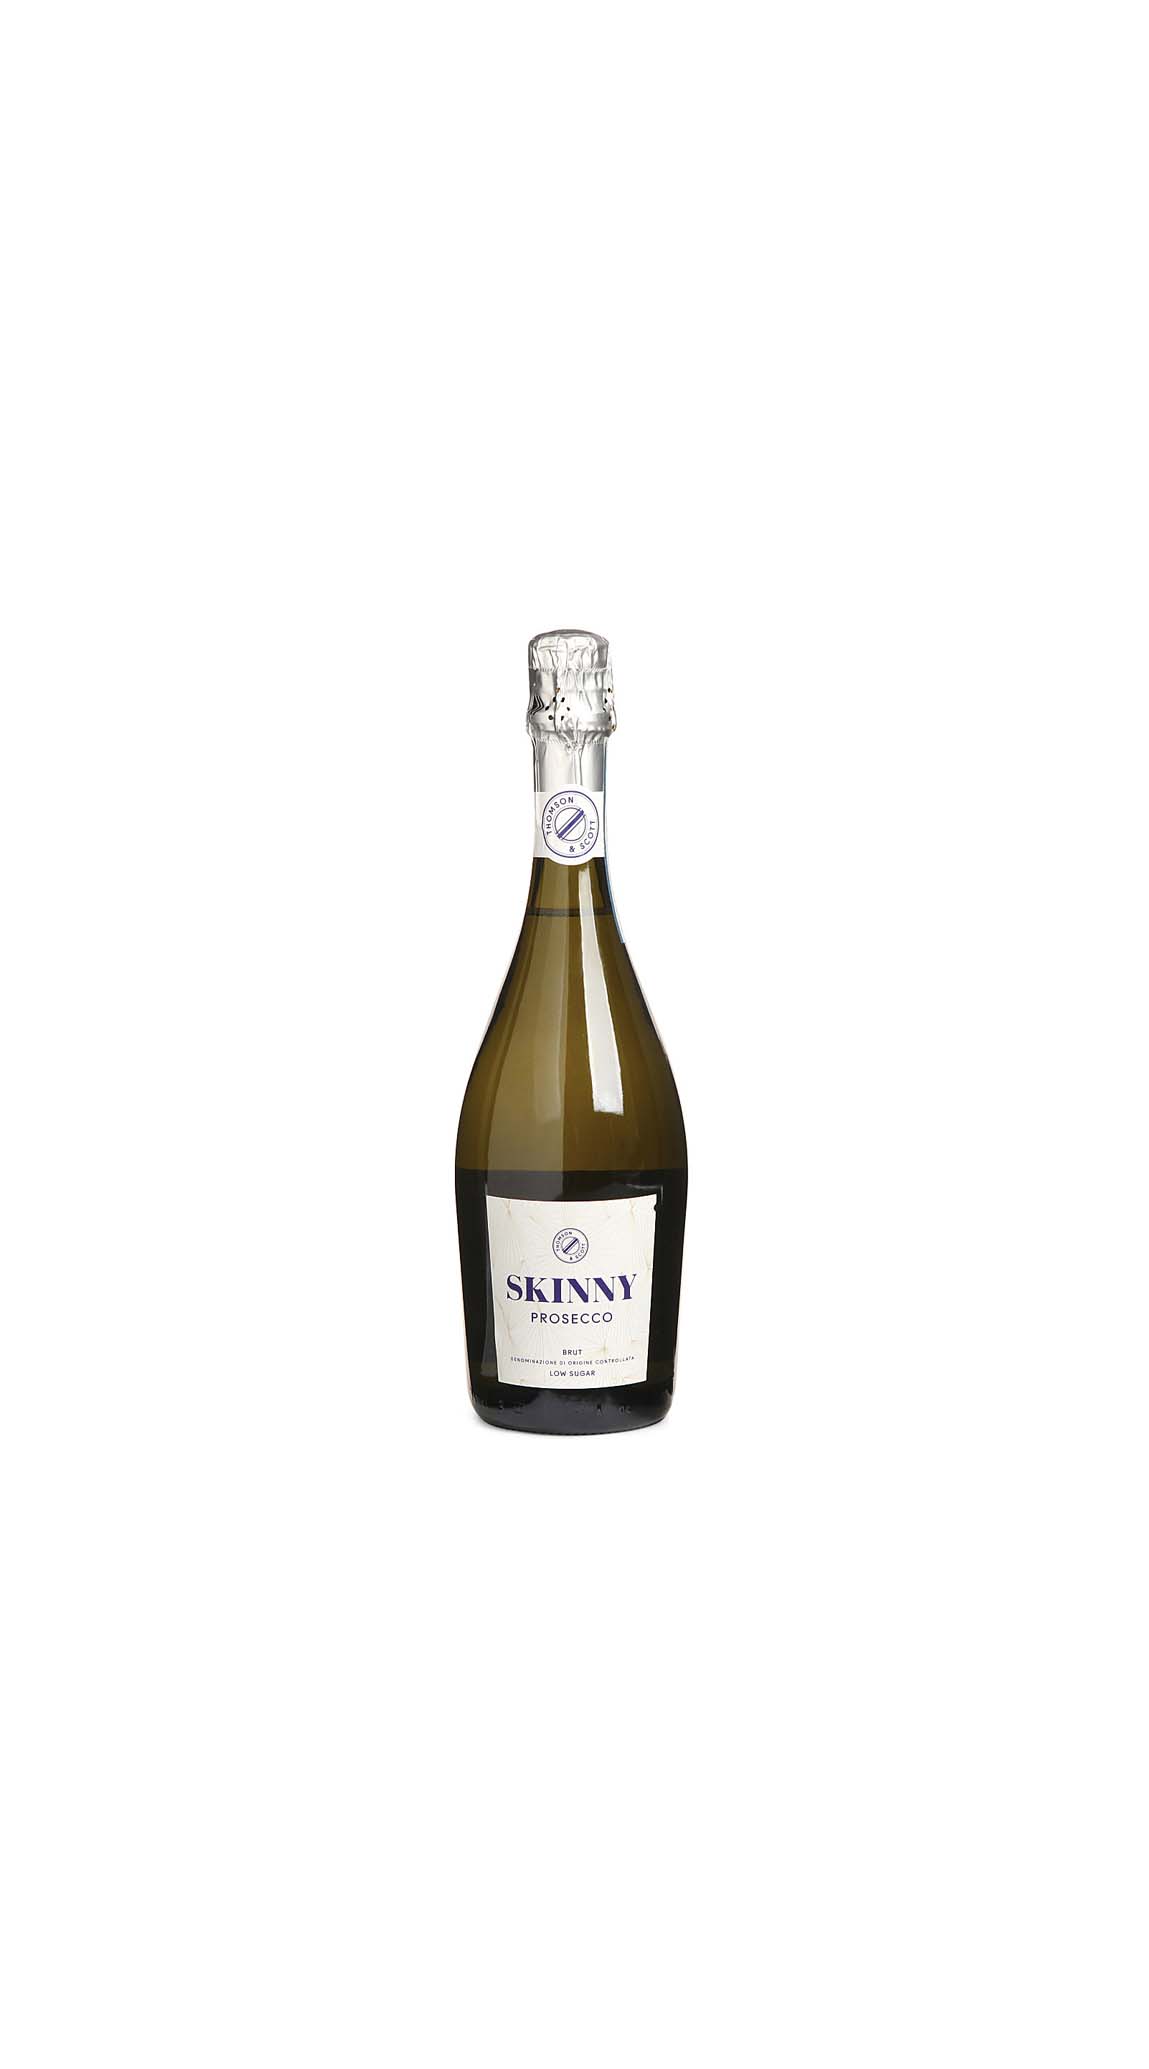 The 11% ABV Skinny Prosecco is also organic and suitable for vegans.